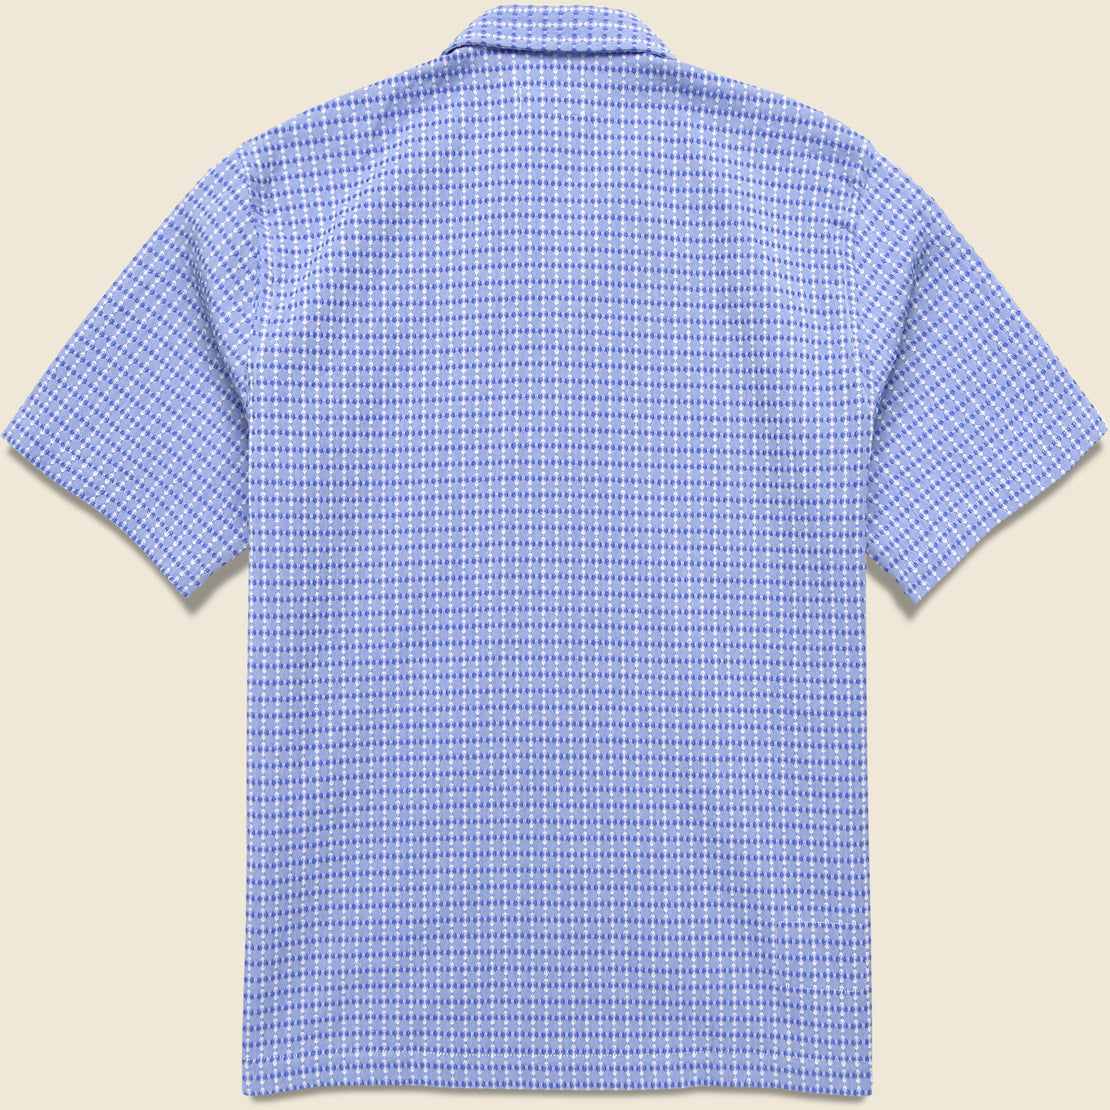 Delos Cotton Camp Shirt - Blue - Universal Works - STAG Provisions - Tops - S/S Woven - Solid